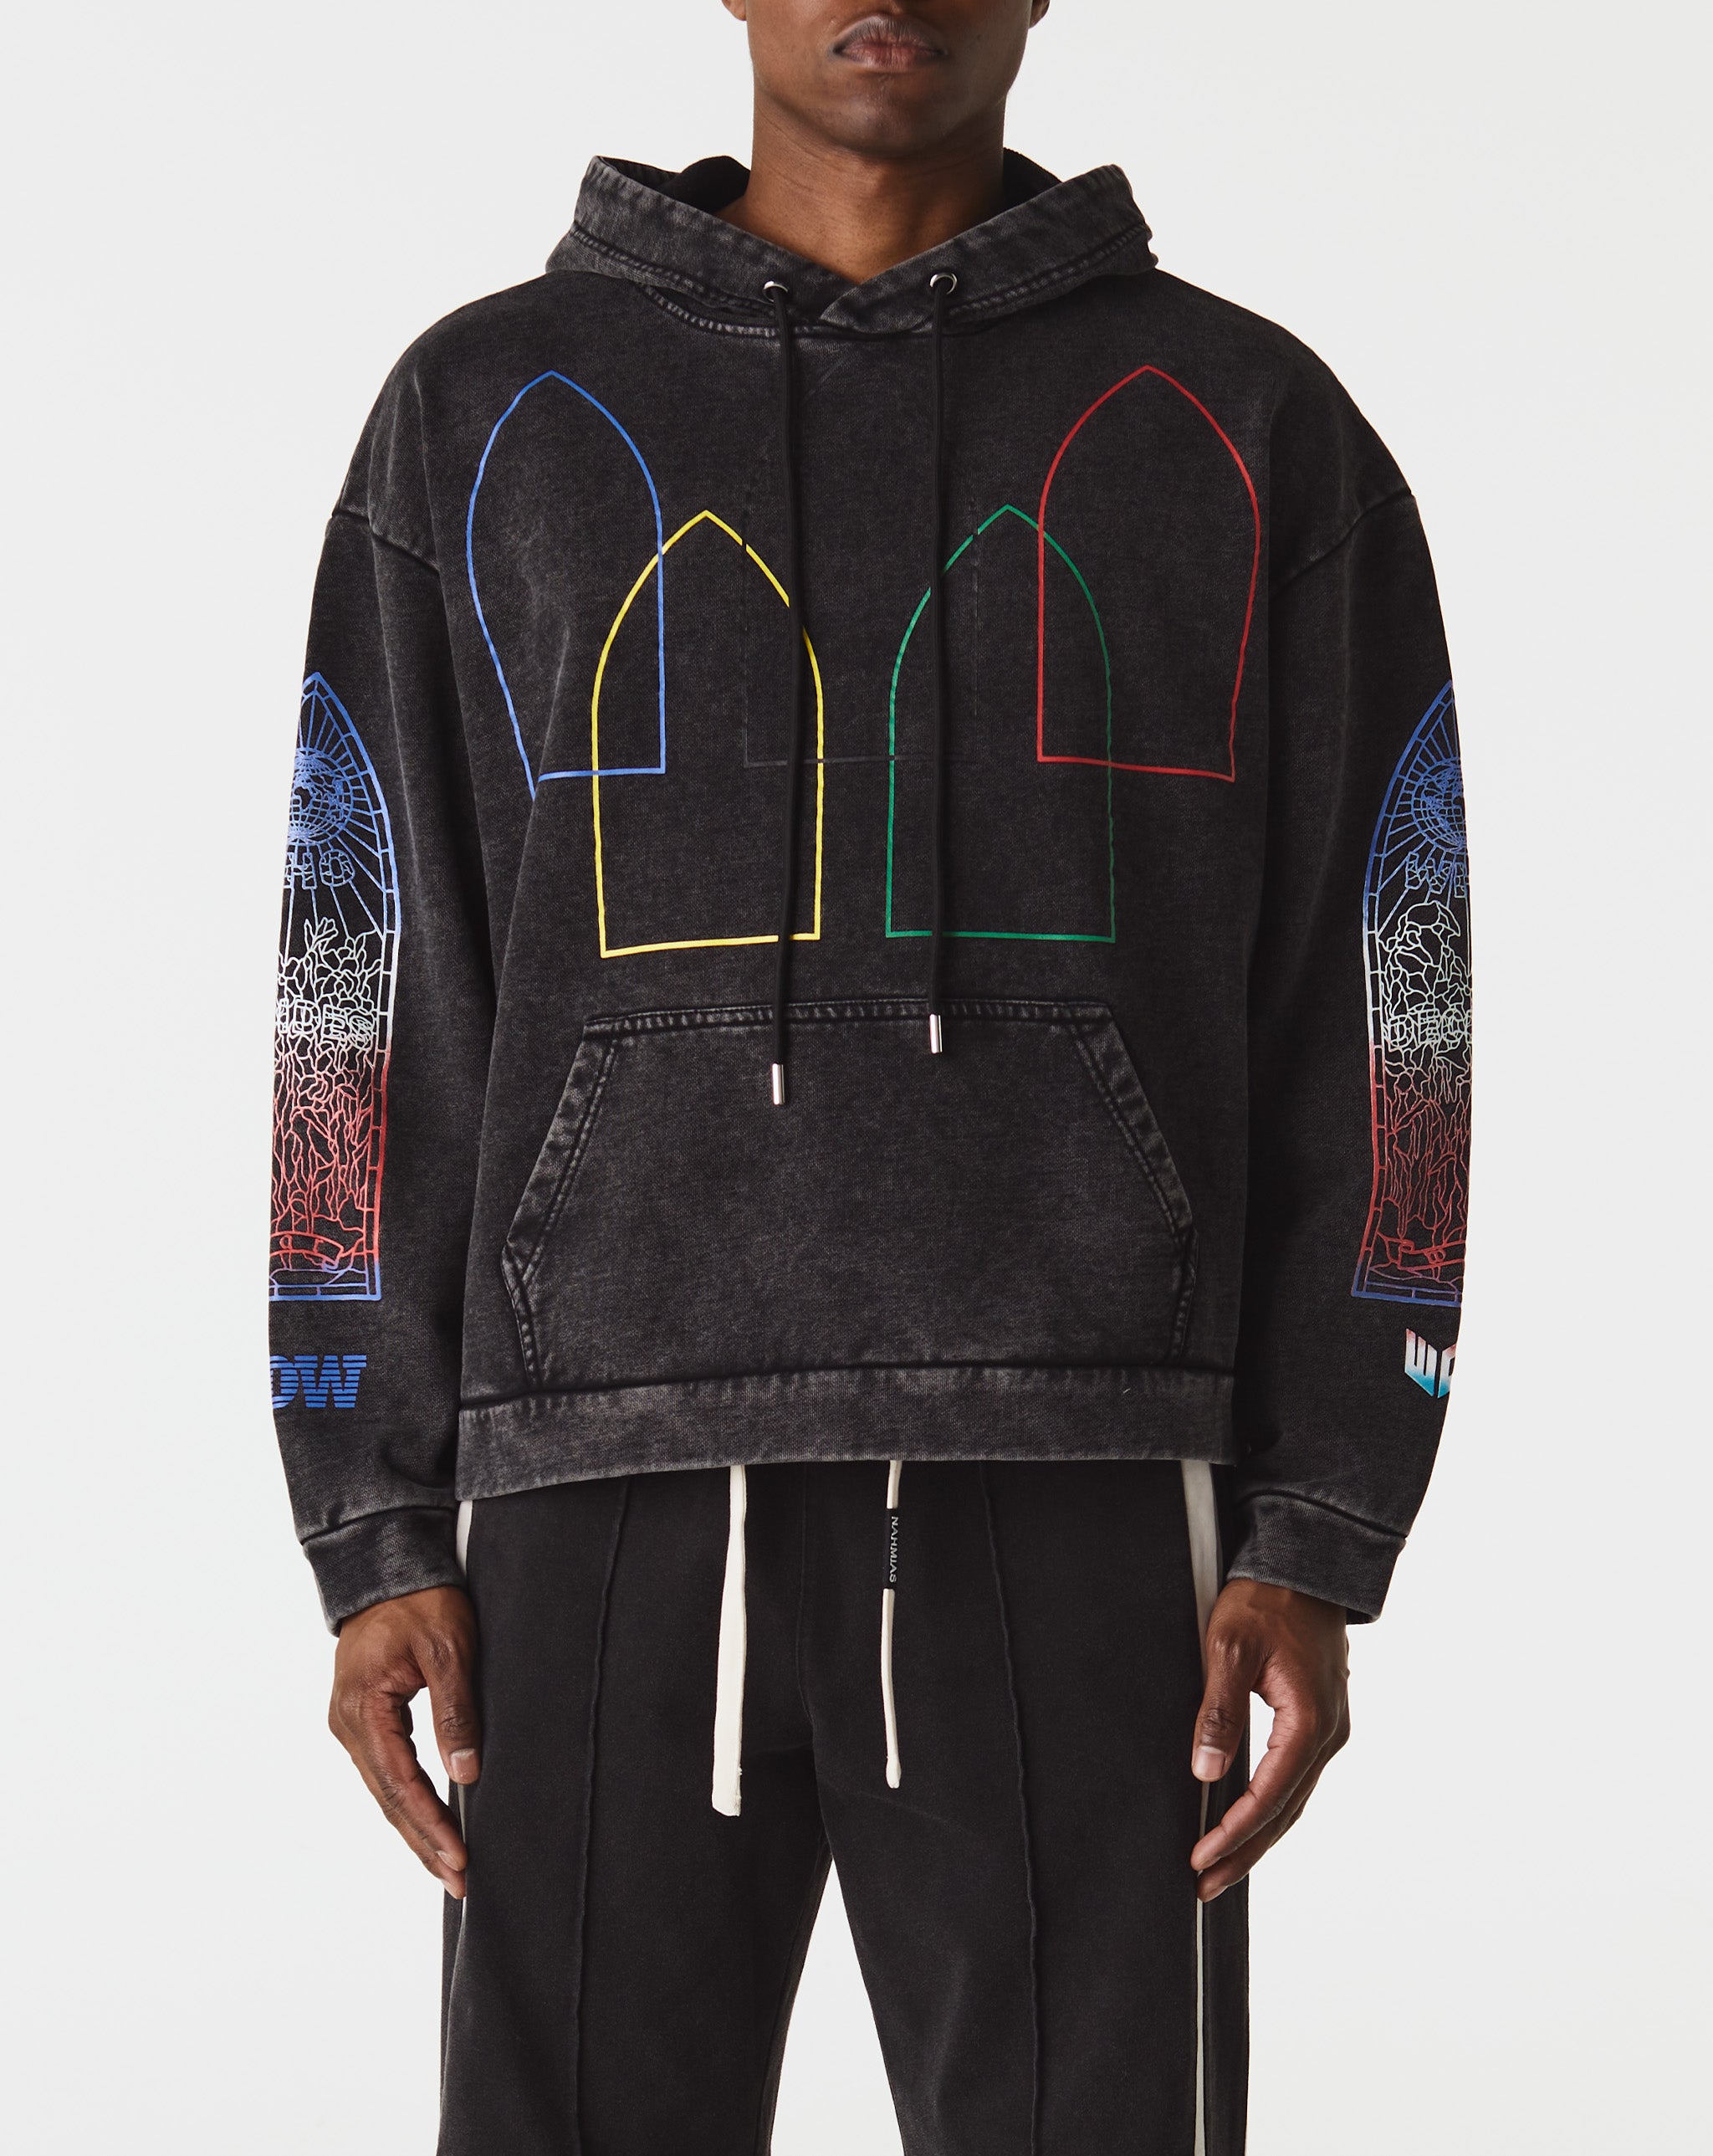 Who Decides War Intertwined Windows Hoodie  - Cheap Cerbe Jordan outlet